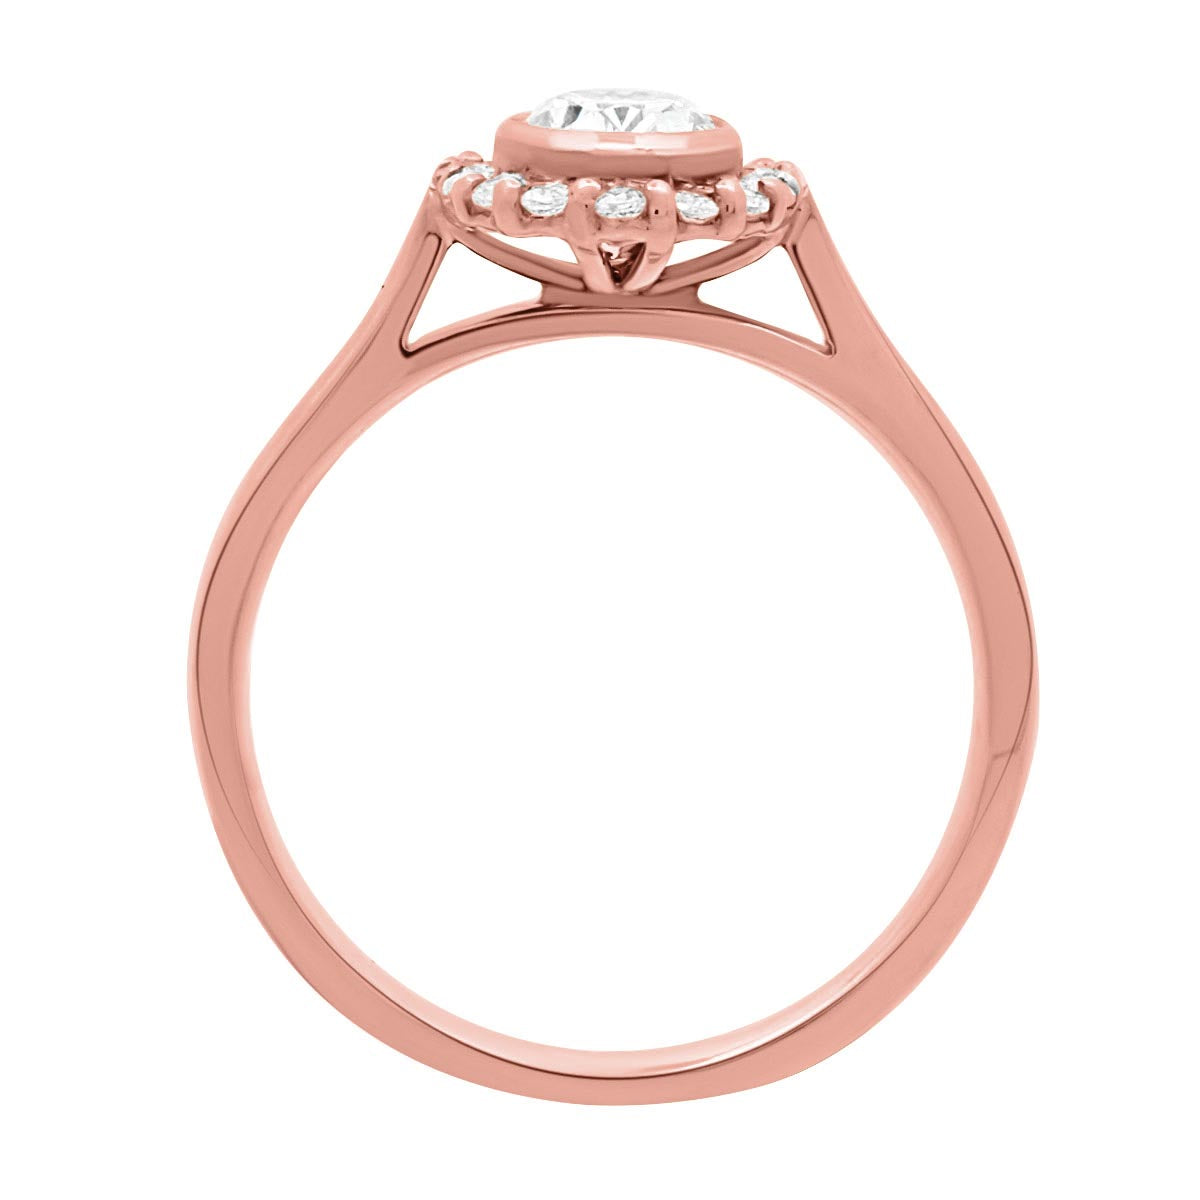  Oval Halo Diamond Ring in rose gold standing upright